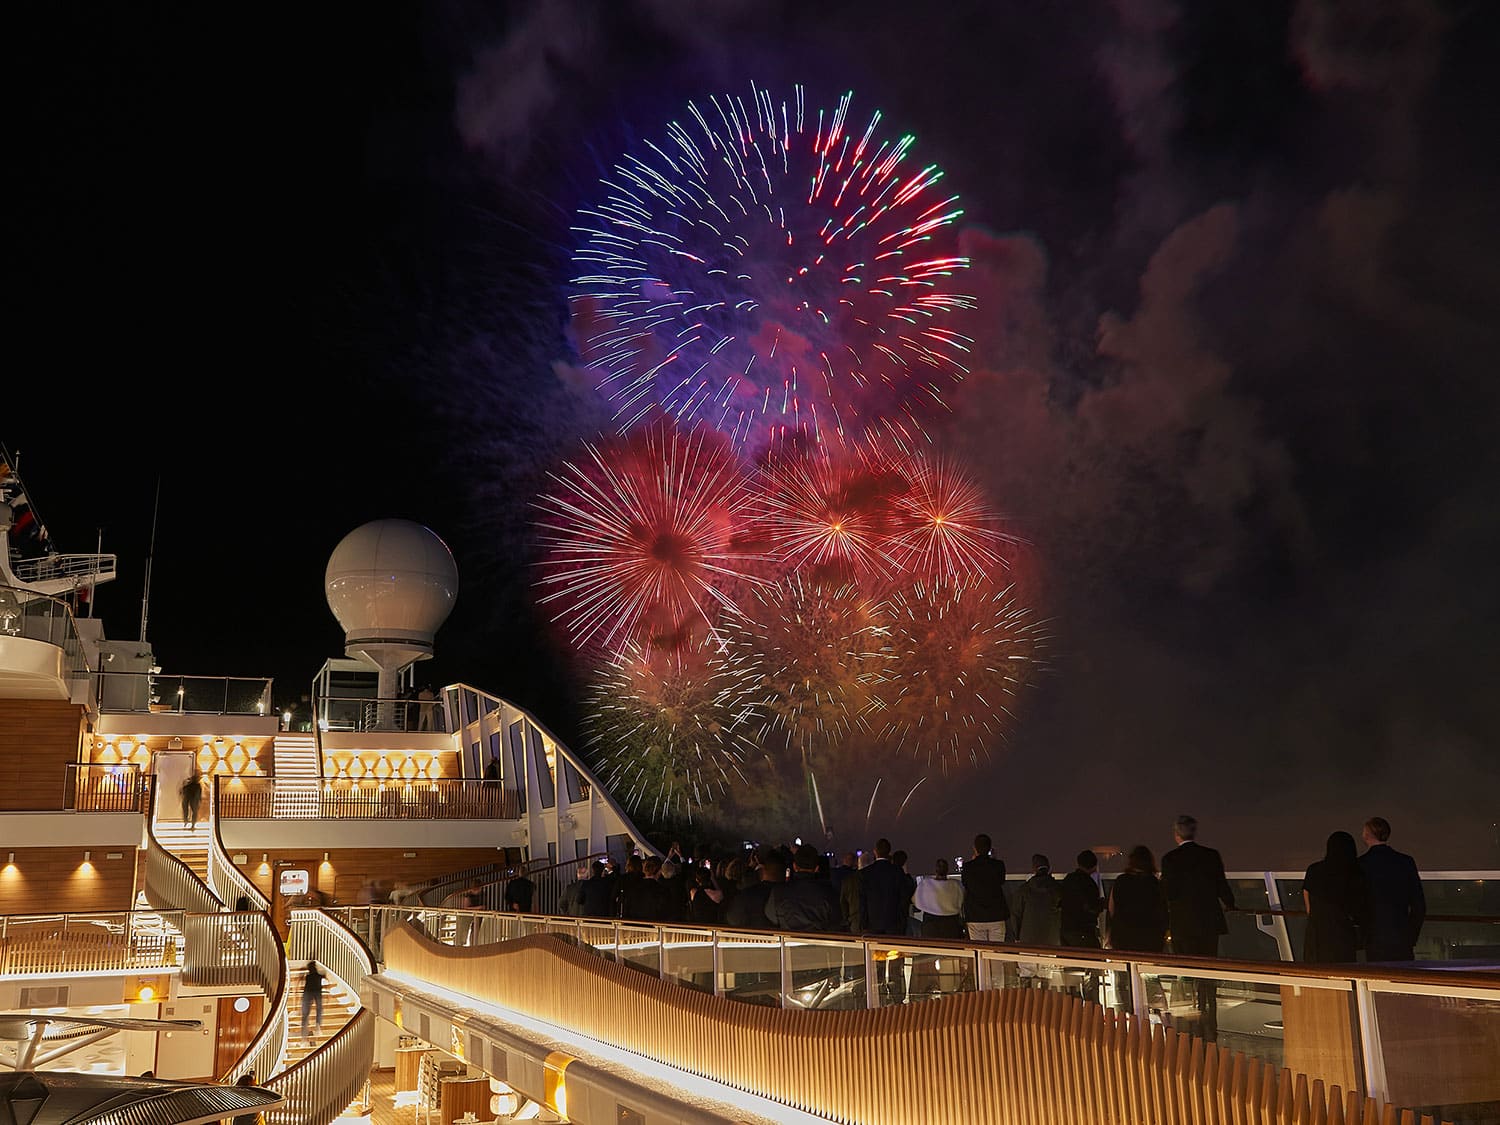 Guests watch fireworks on board the Oceania Vista during the cruise ship’s christening.